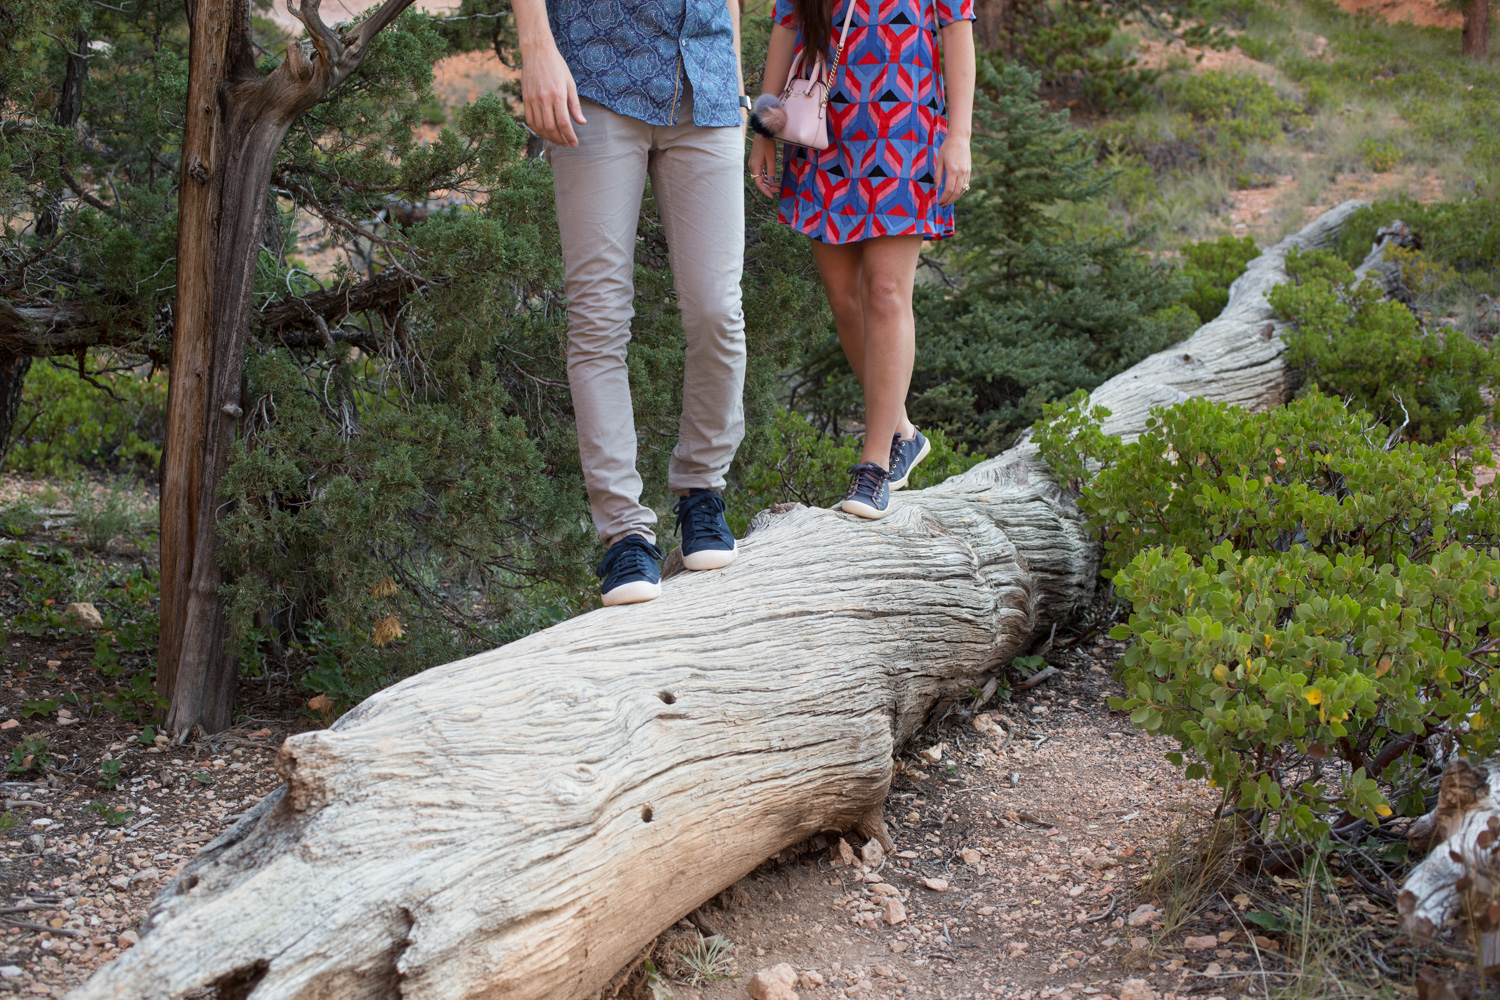 Couples Travel Blog- Bryce Canyon